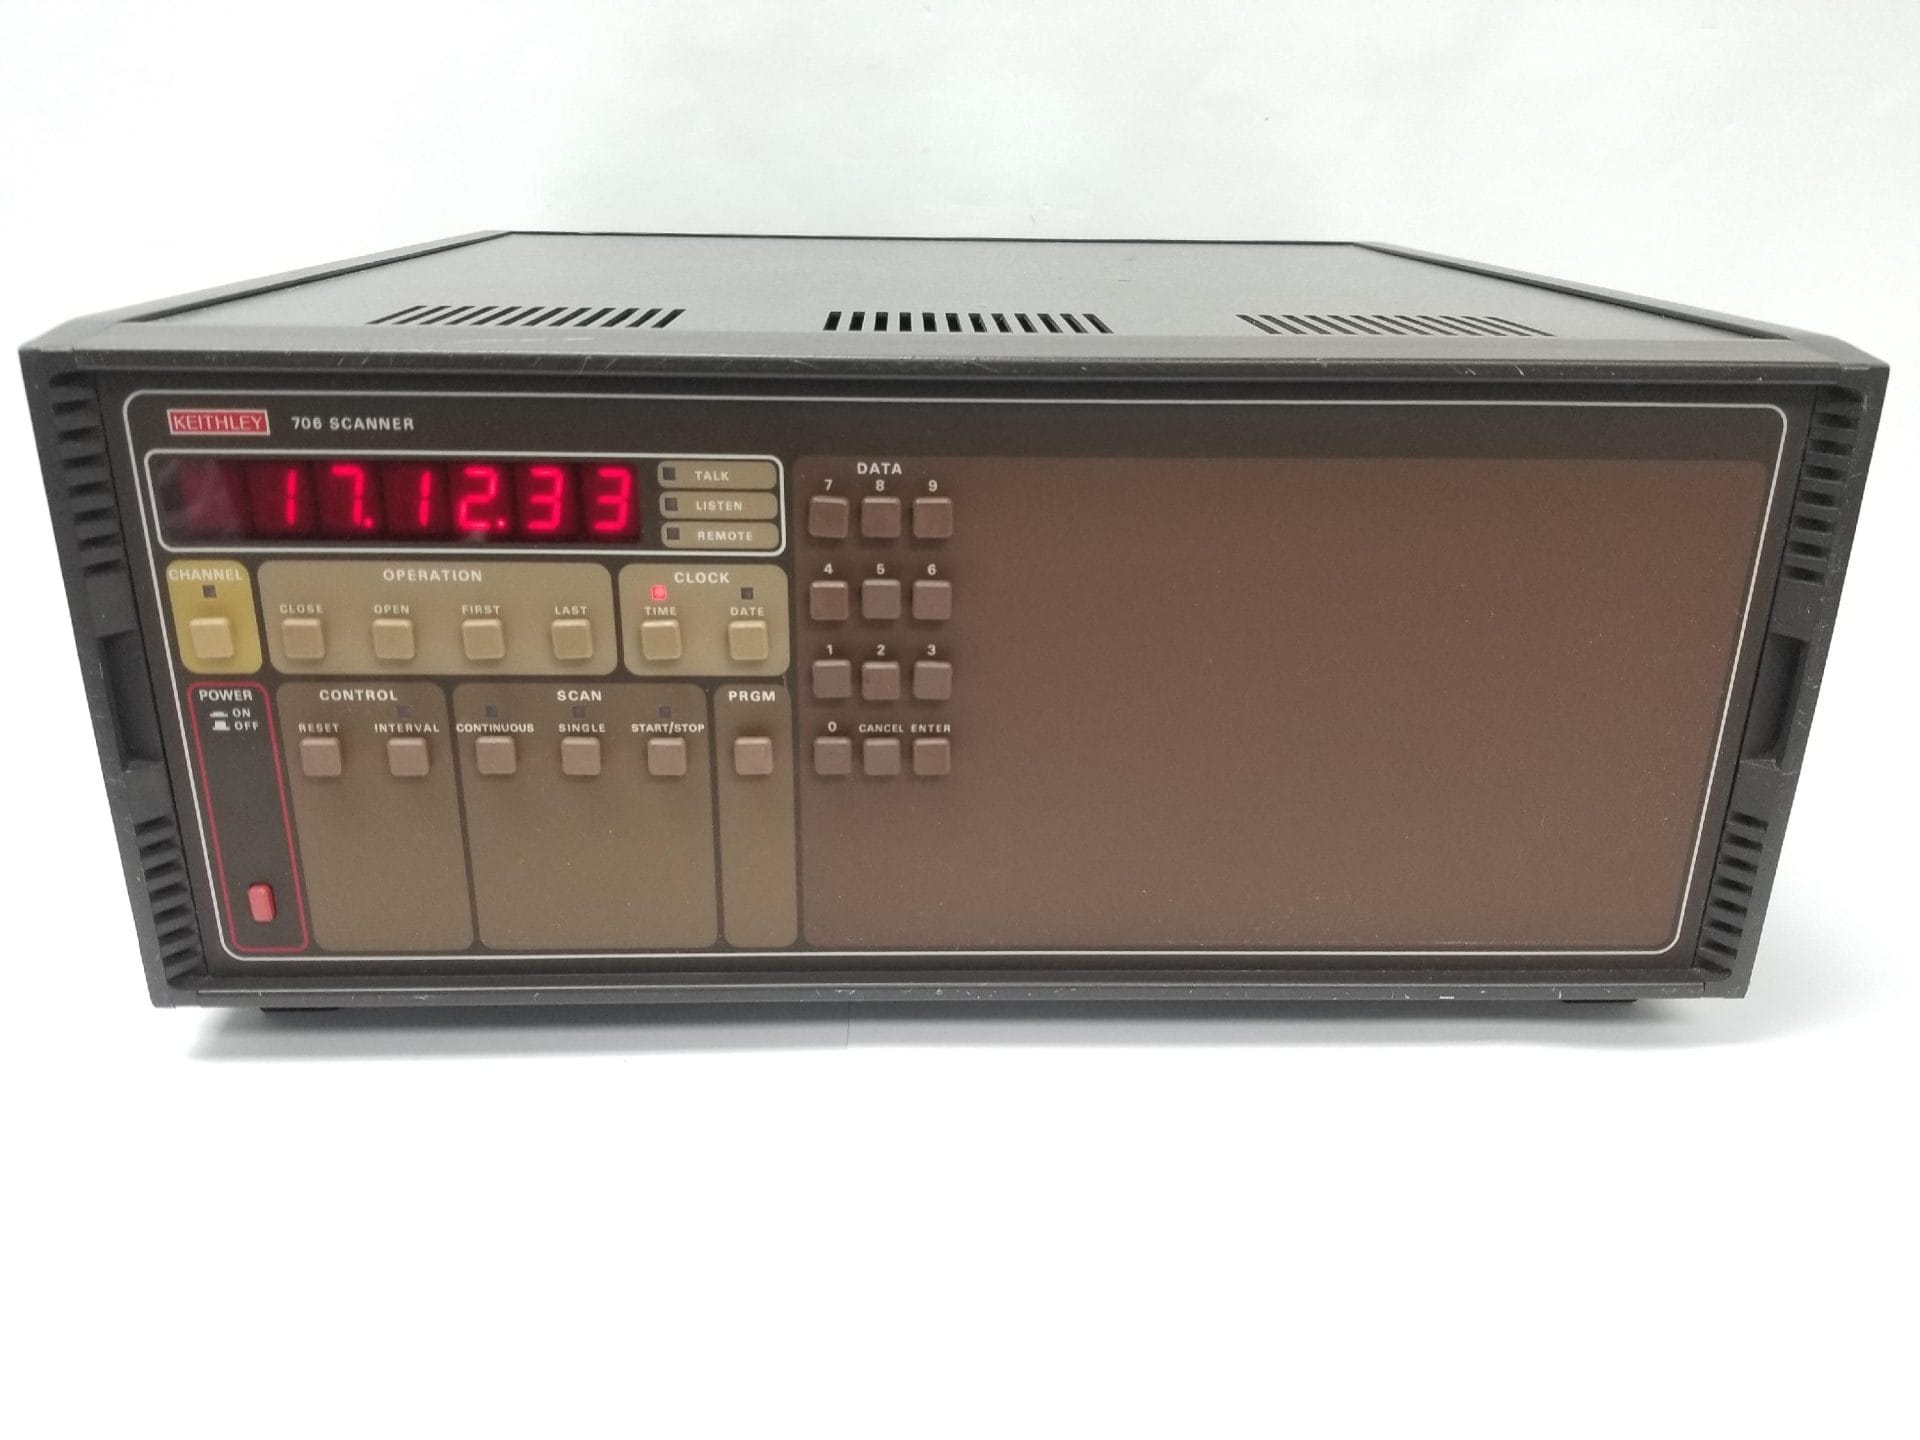 KEITHLEY 706 SCANNER MAINFRAME 